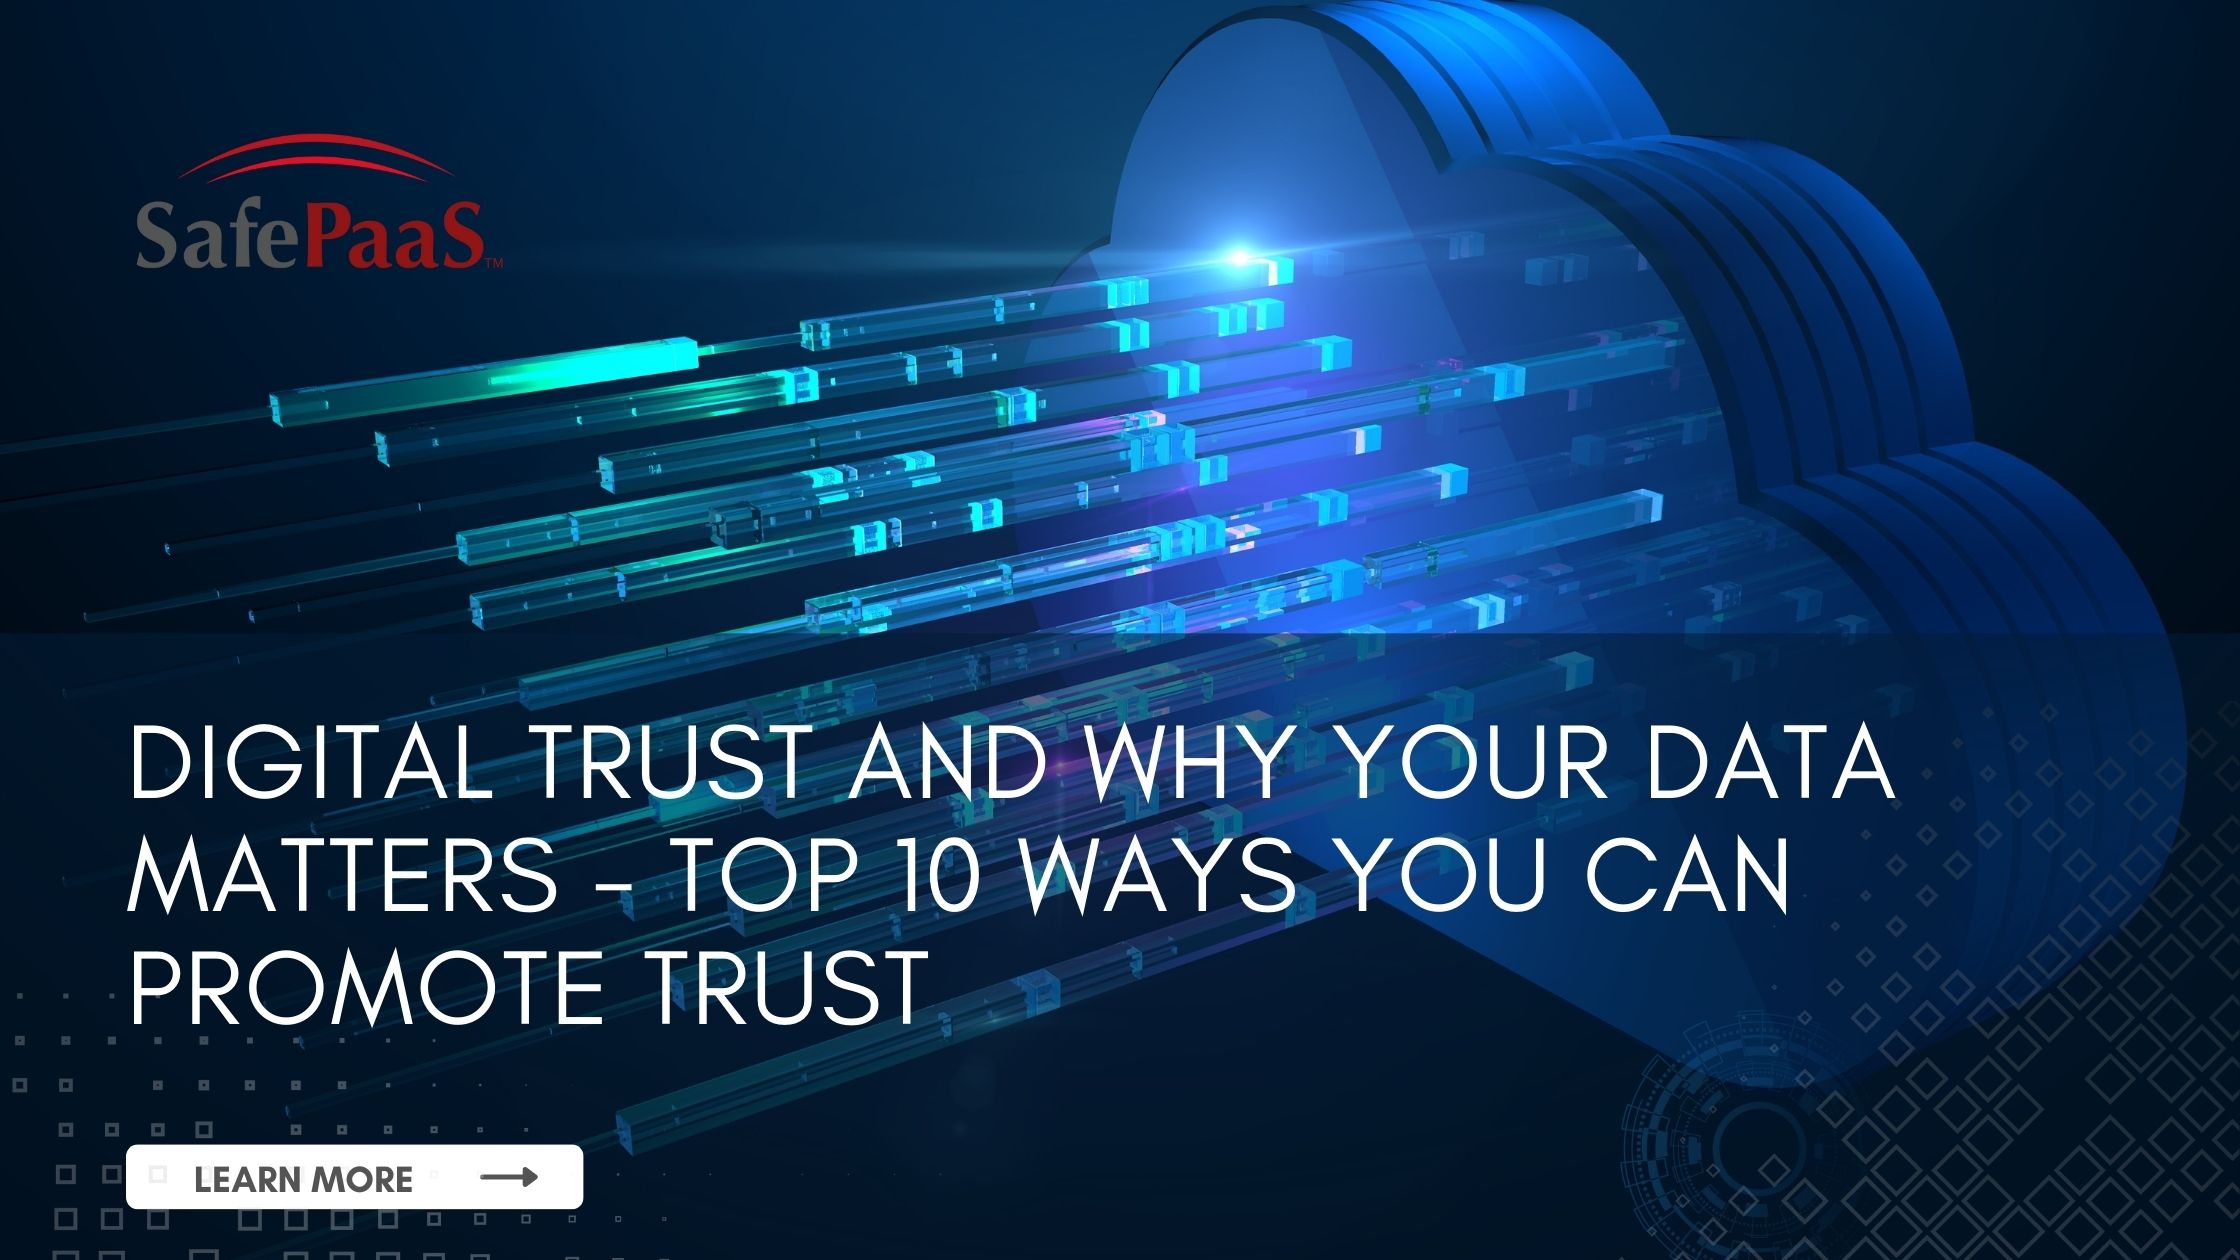 Digital Trust and Why Your Data Matters - SafePaaS